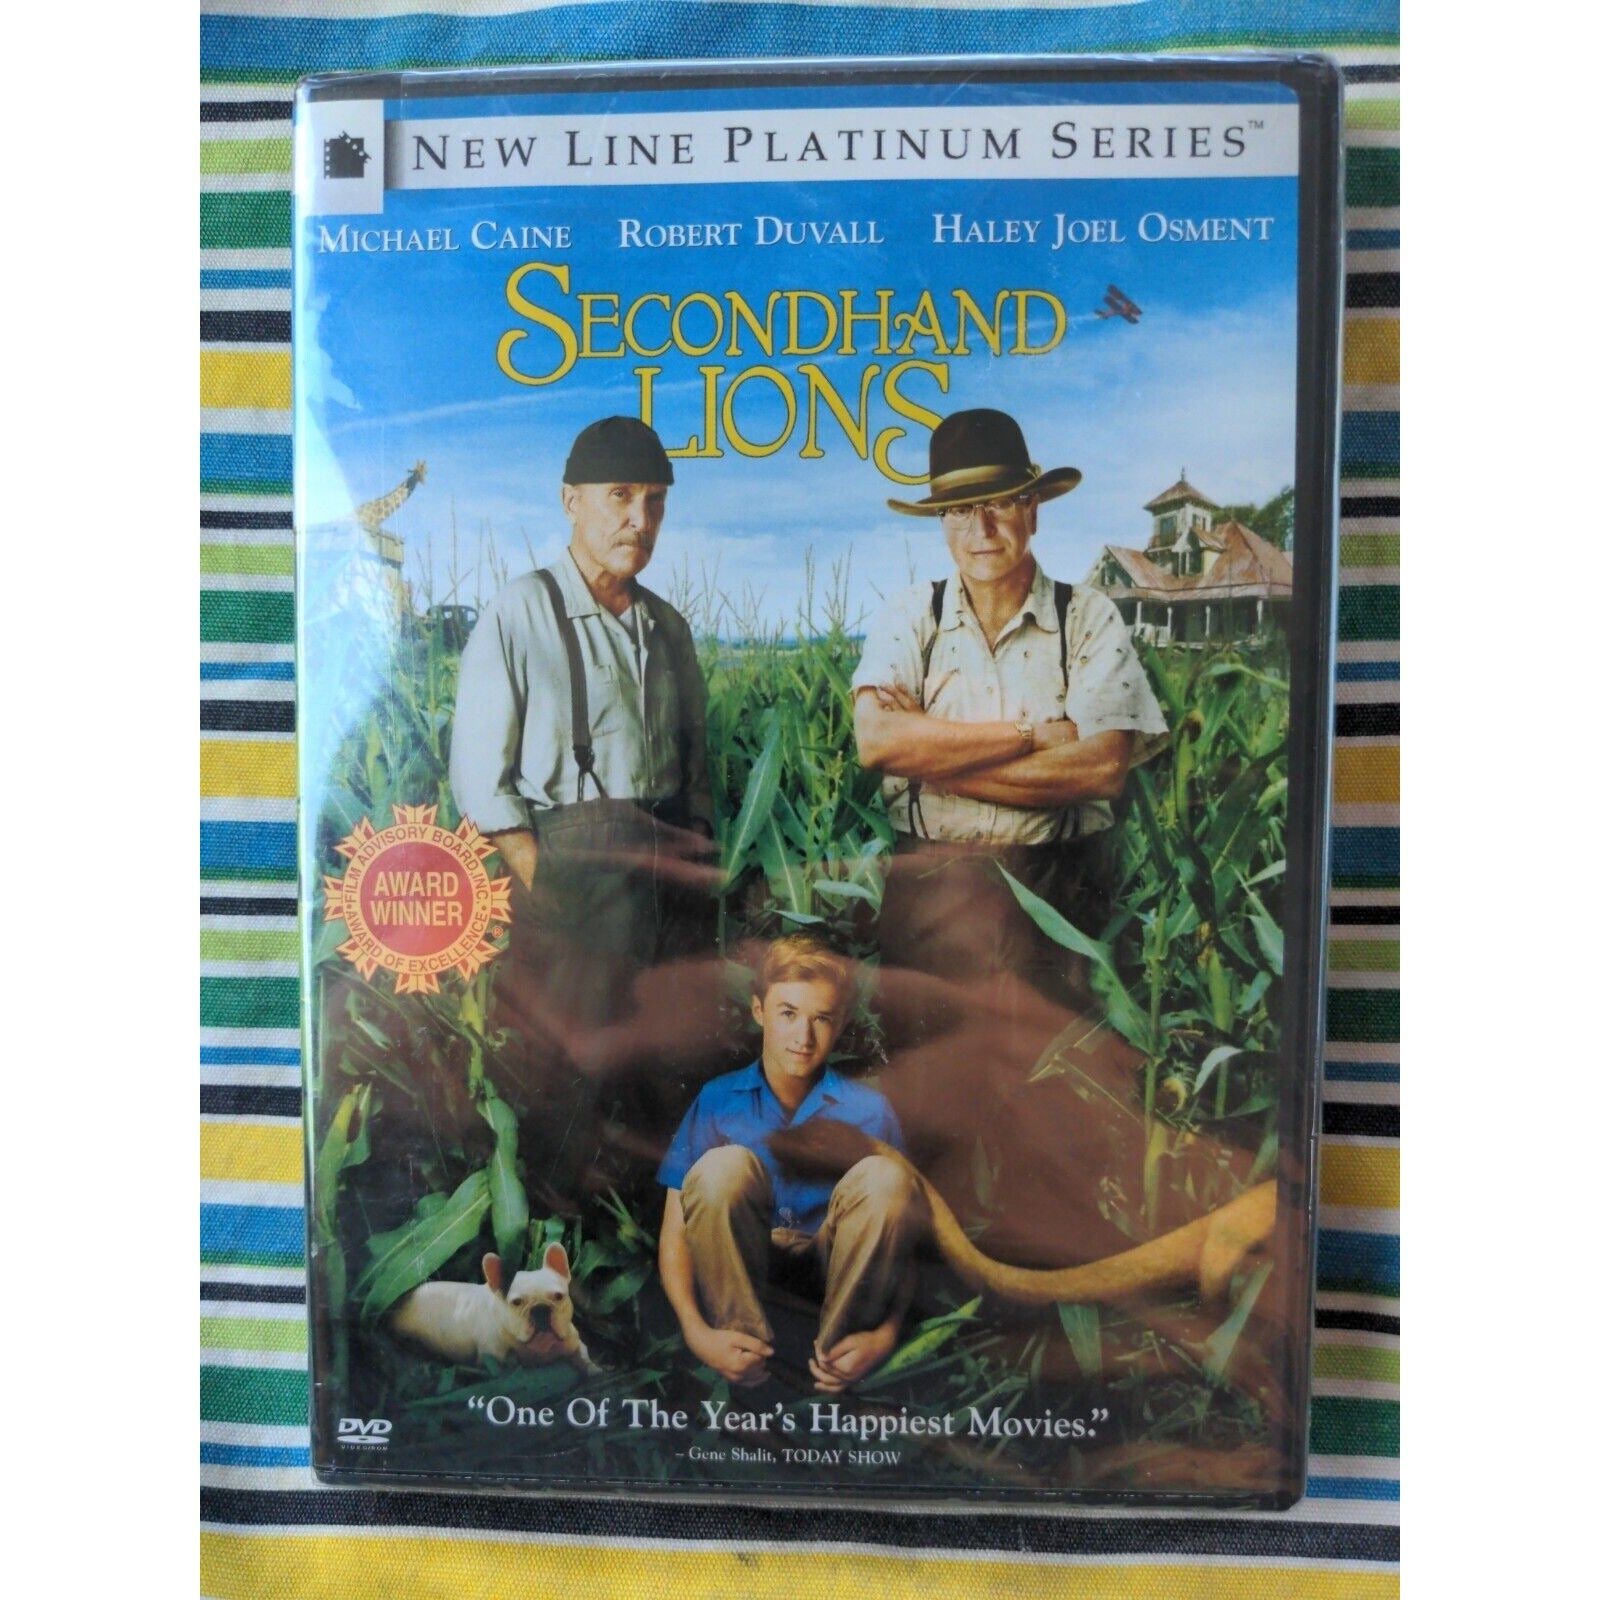 Secondhand Lions (DVD, 2003) New!